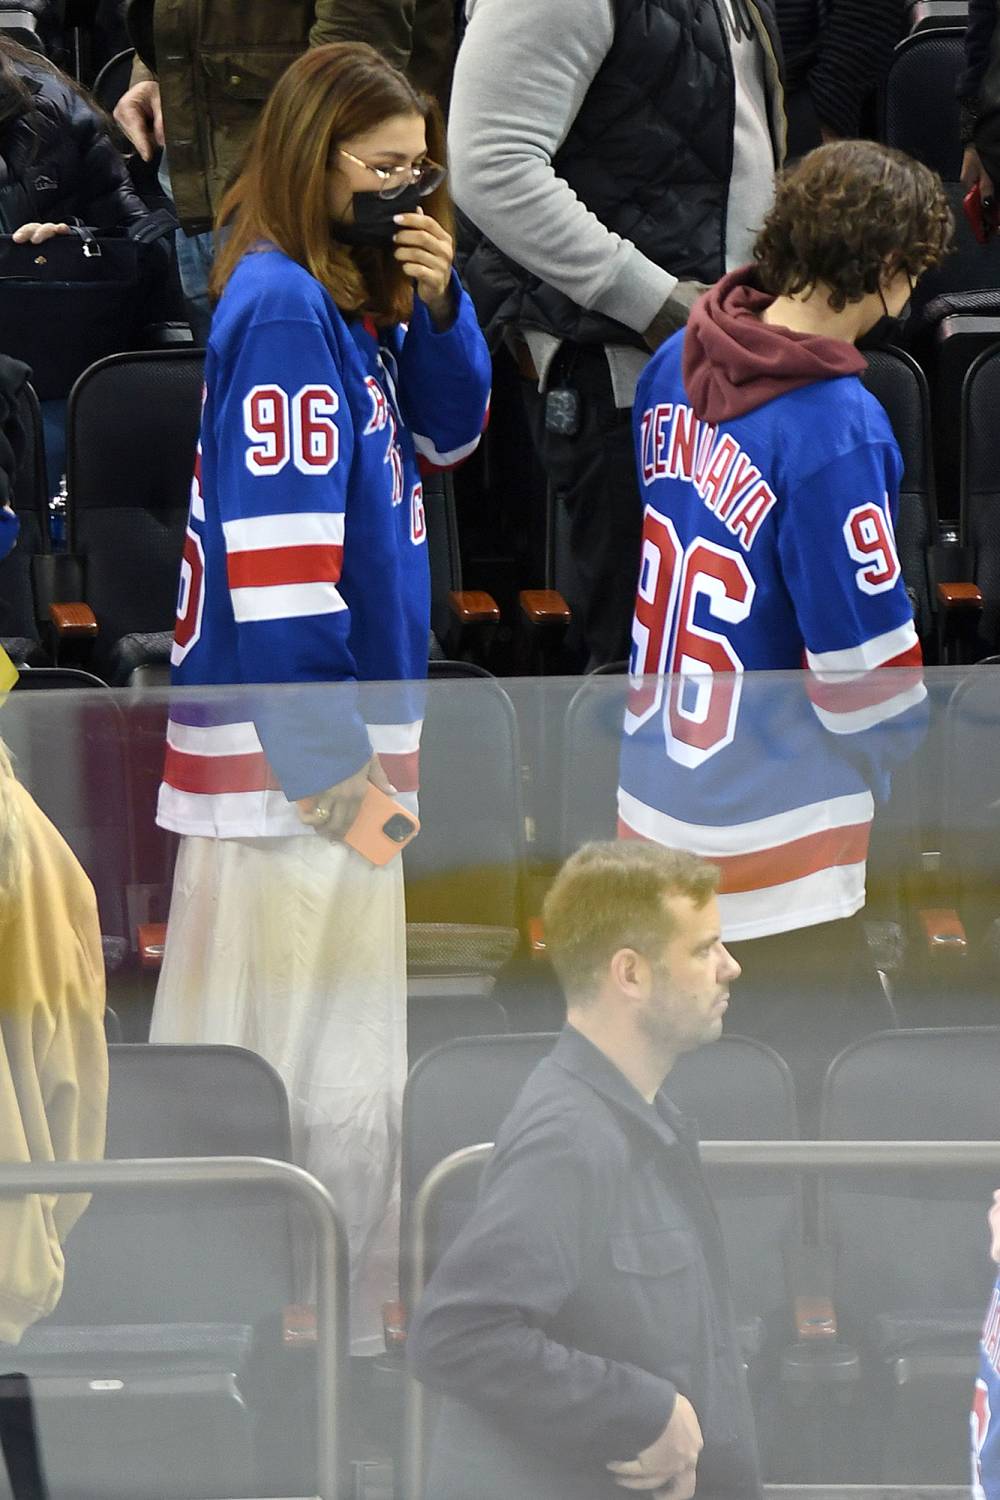 https://www.usmagazine.com/wp-content/uploads/2022/02/Zendaya-and-Tom-Holland-Wear-Jerseys-With-Each-Others-Names-at-New-York-Rangers-NHL-Hockey-Game.jpg?w=1000&quality=70&strip=all